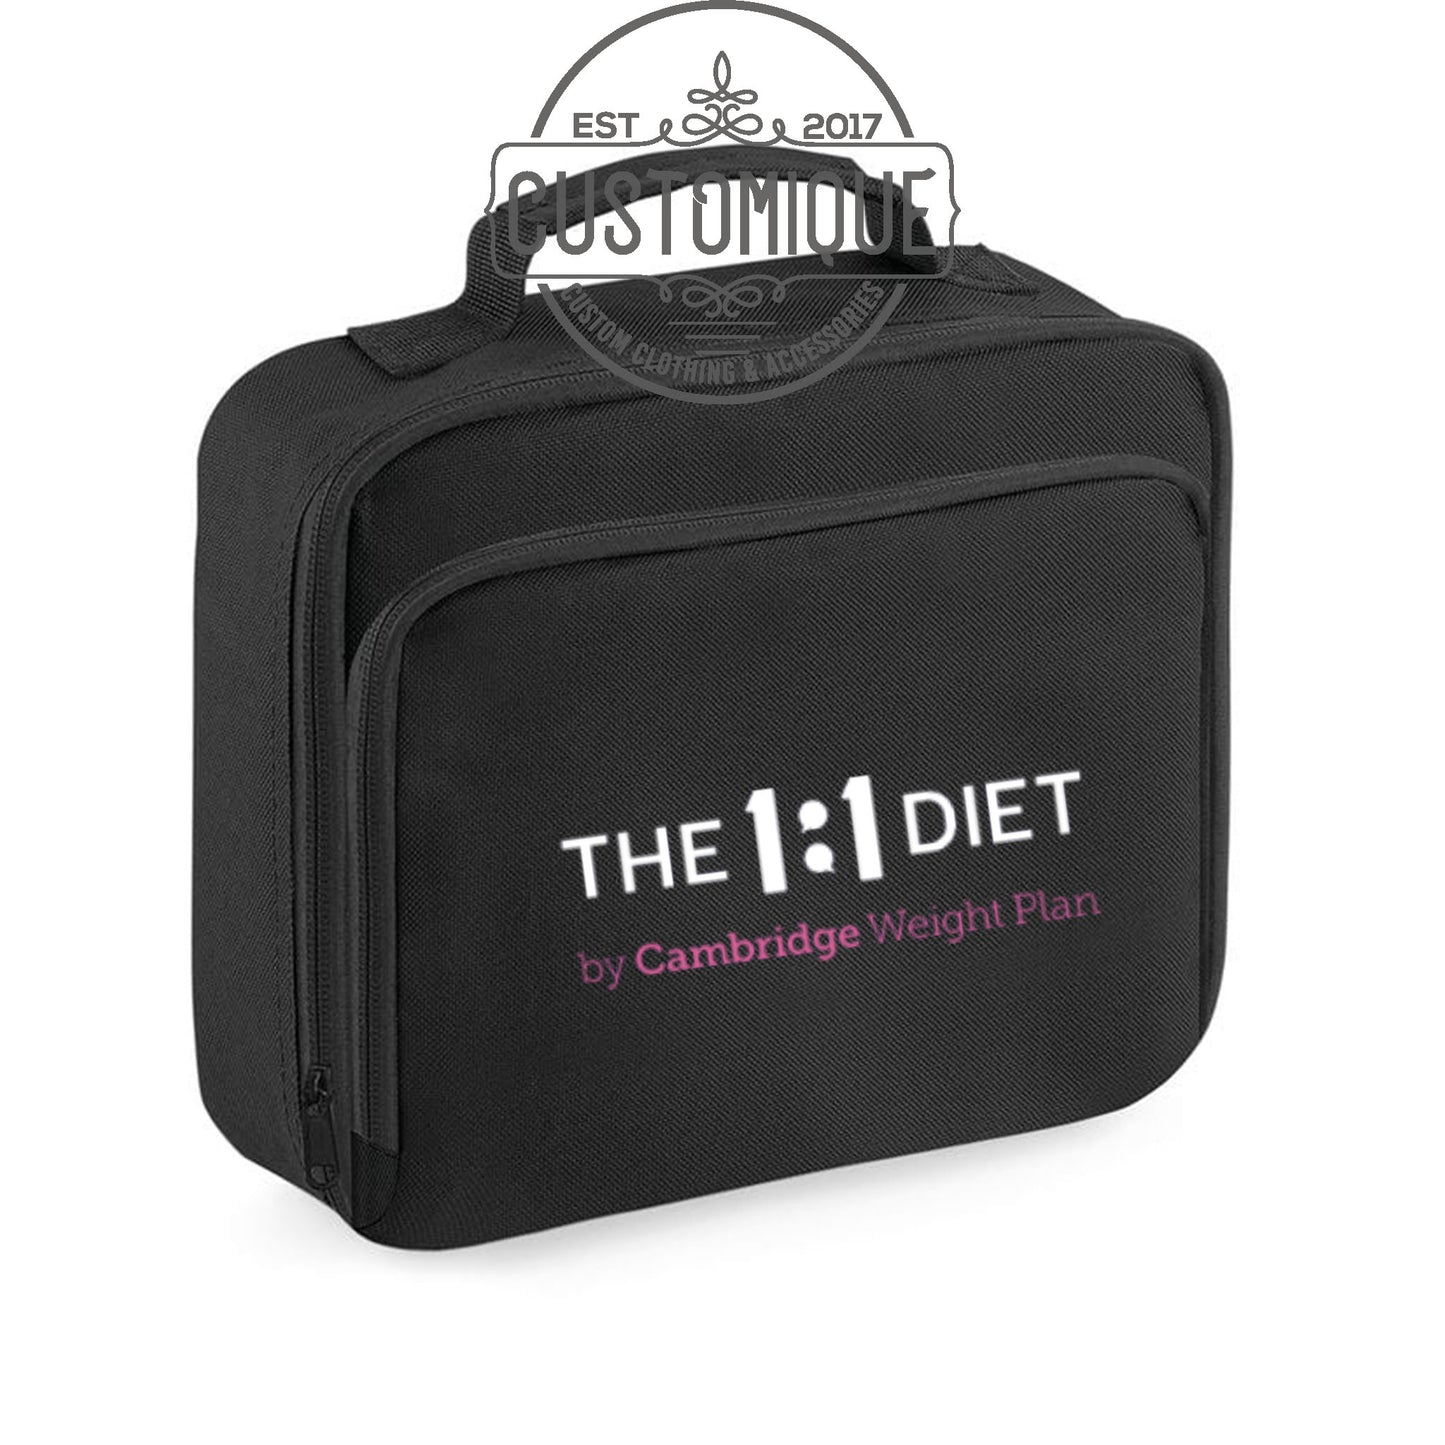 The 1:1 Diet - Lunch Bag